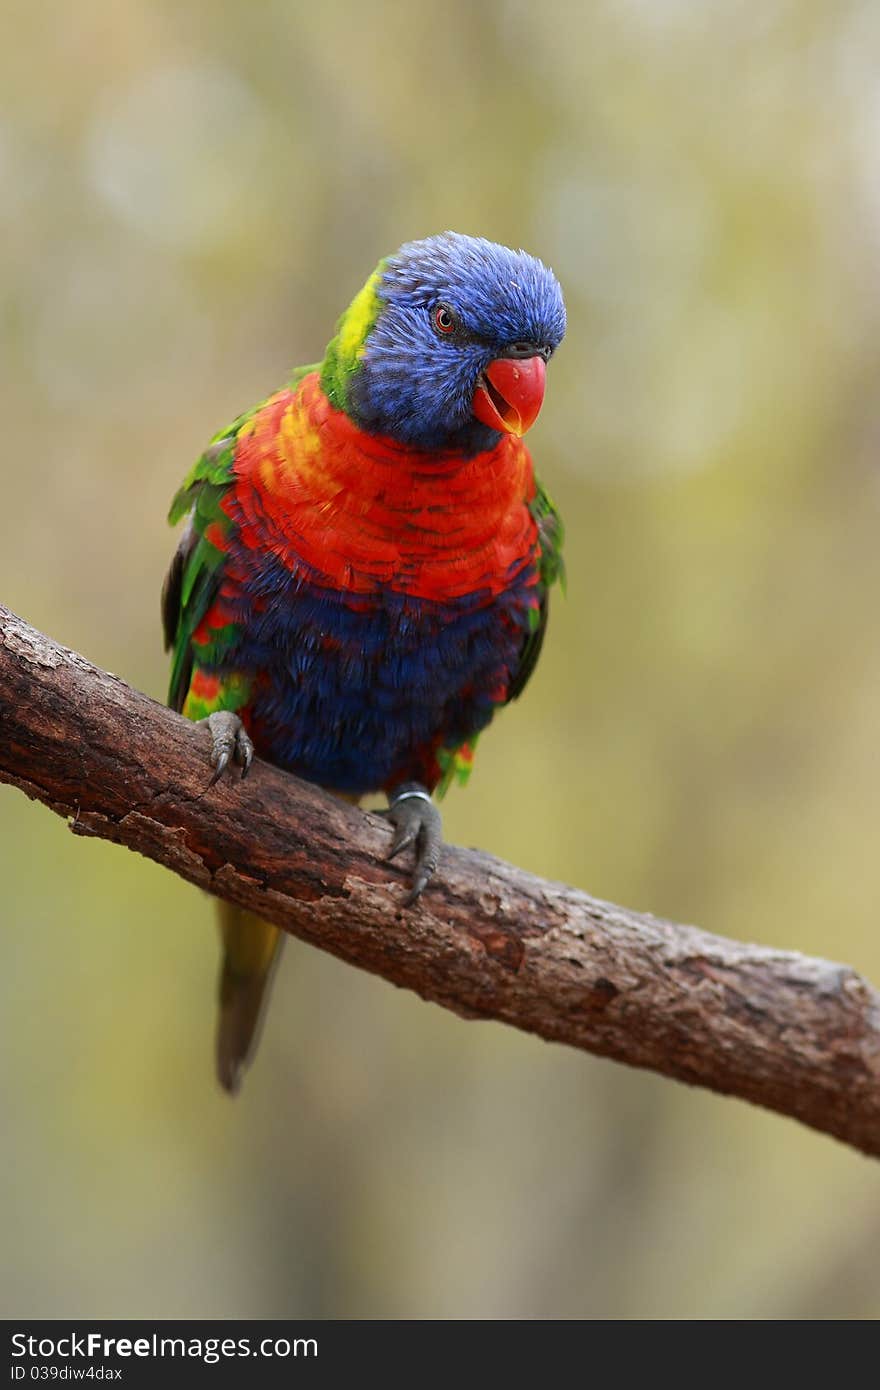 Lorikeet, Lori lives in pairs that sometimes clump together into flocks. In guarding their nesting territory and the food is extremely aggressive and can evict the birds away a larger size than he is (eg fl�t?�ka Australia). Lorikeet, Lori lives in pairs that sometimes clump together into flocks. In guarding their nesting territory and the food is extremely aggressive and can evict the birds away a larger size than he is (eg fl�t?�ka Australia).